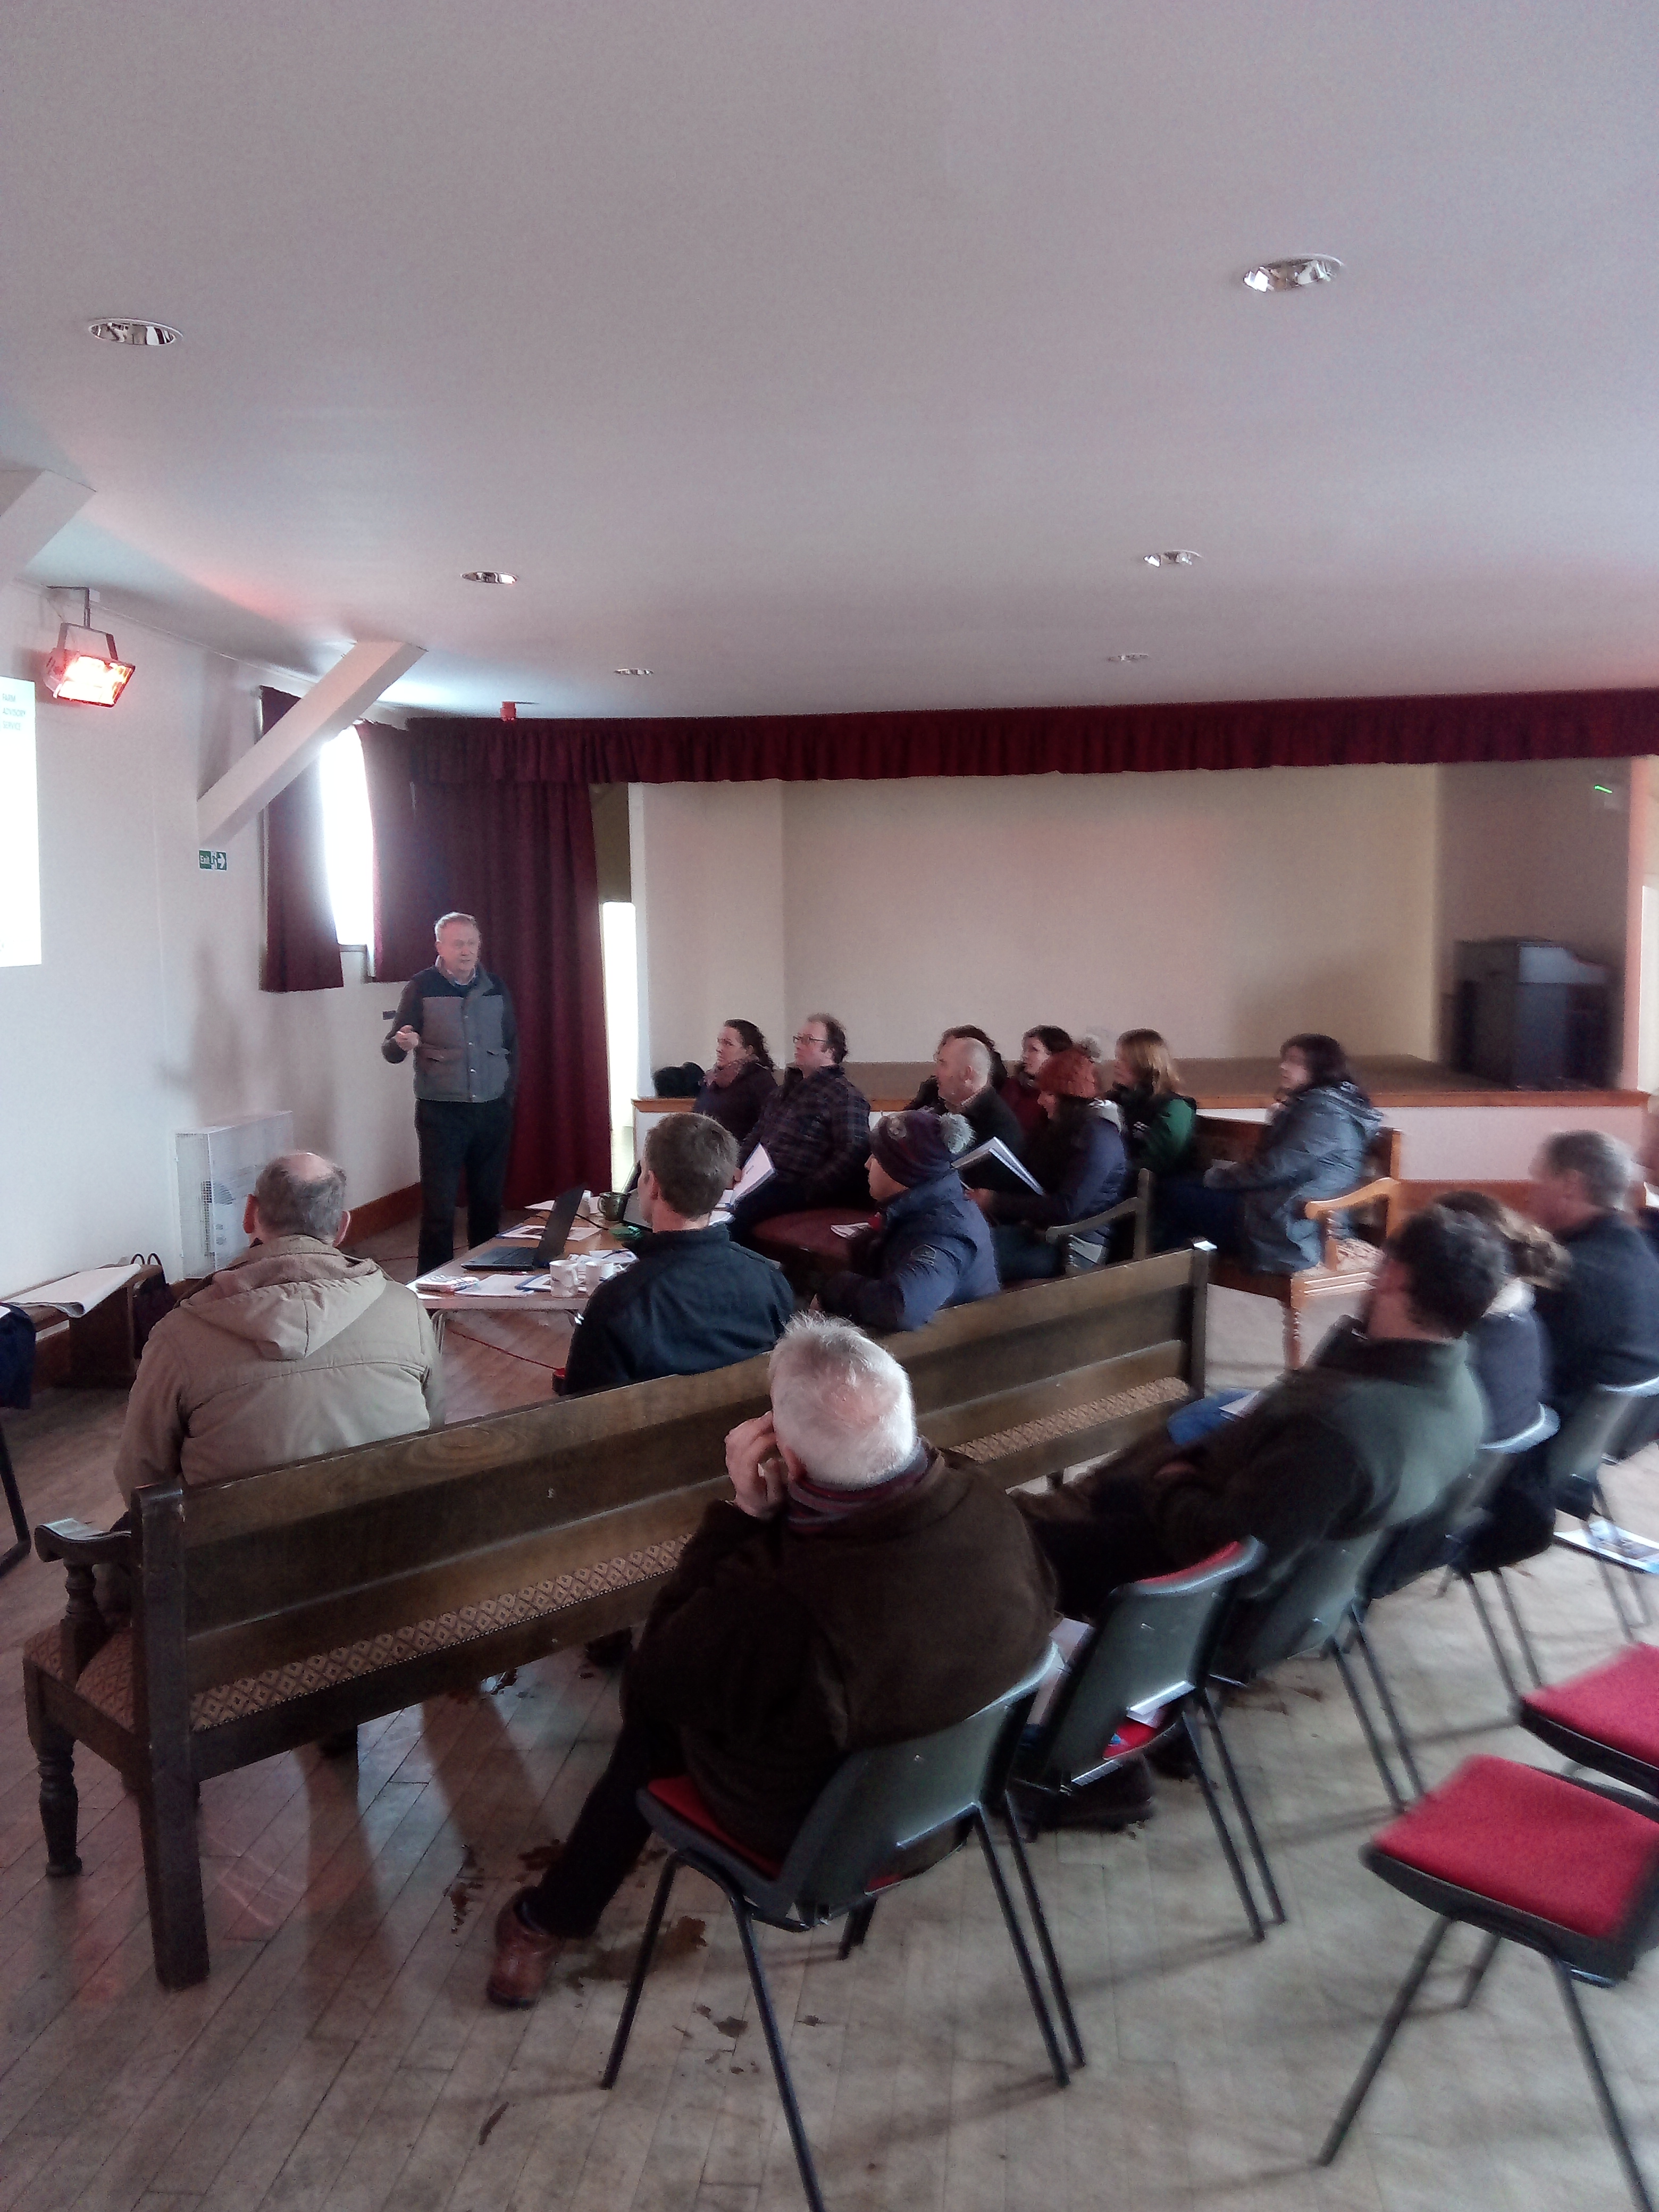 Farmers in the Craigie Village Hall, Ayrshire during the Wet Weather Resilience Planning event